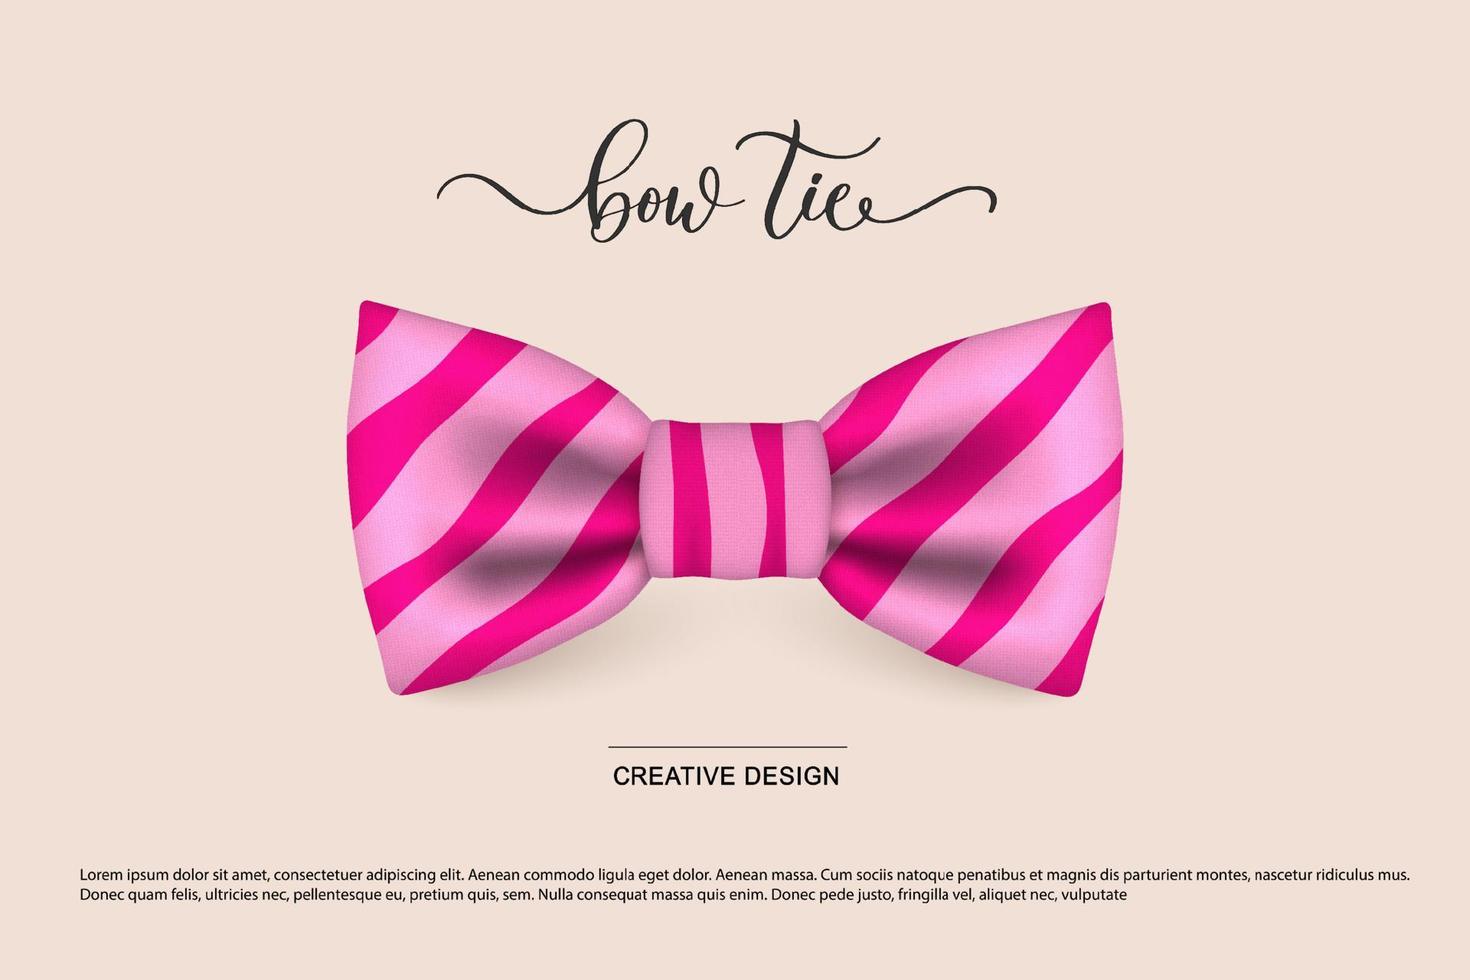 Vector icon of a pink striped bow tie highlighted on a pink background with an inscription. Hipster style